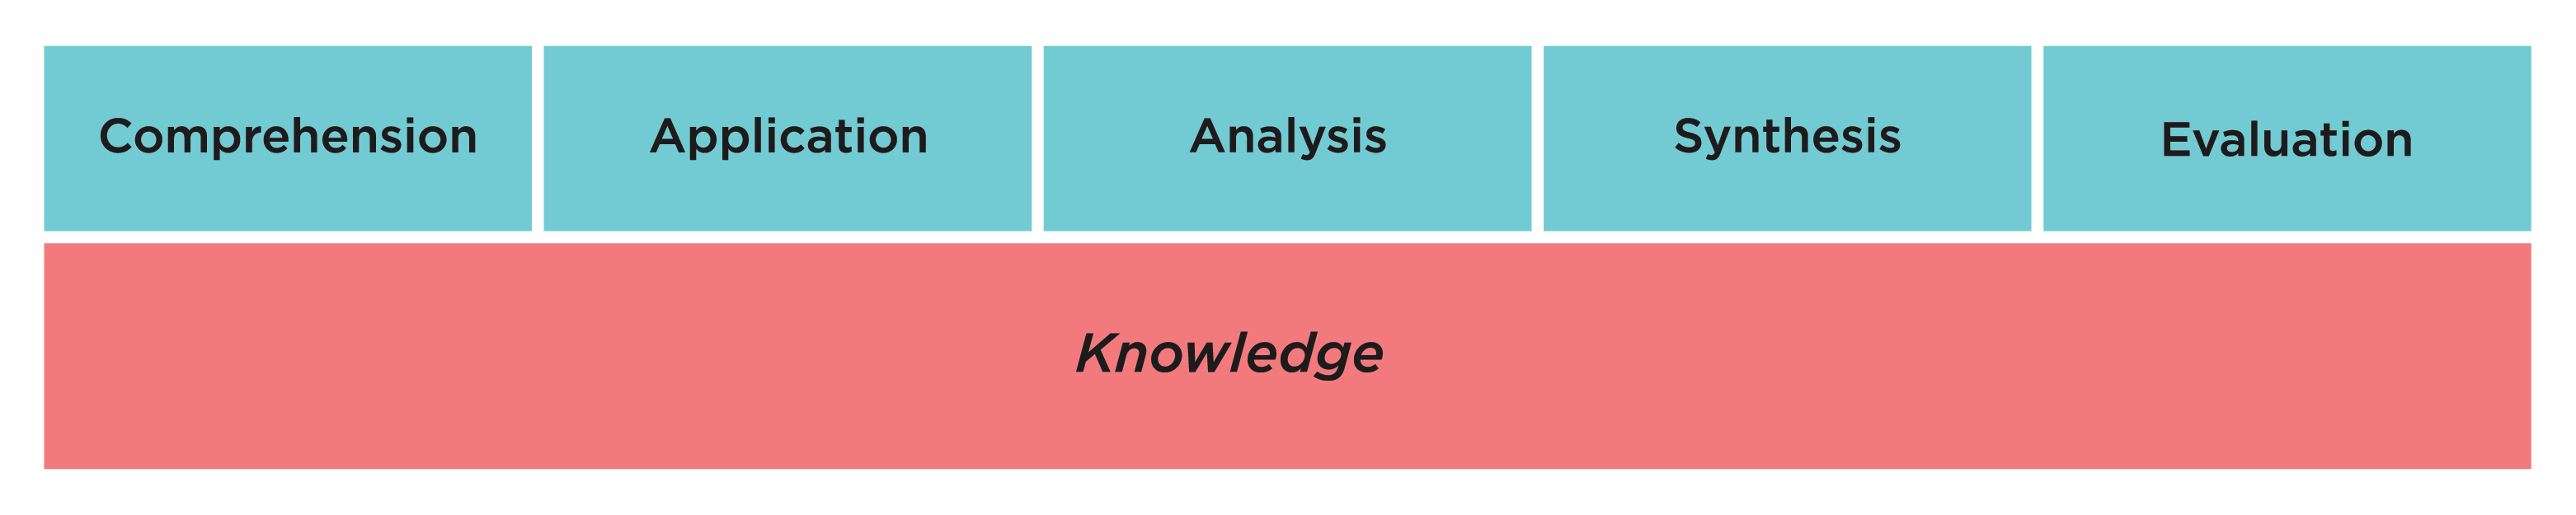 Bloom's Taxonomy as conceptualized by Dylan Wiliam: Comprehension, Application, Analysis, Synthesis and Evaluation stand as pillars on the foundation of Knowledge.